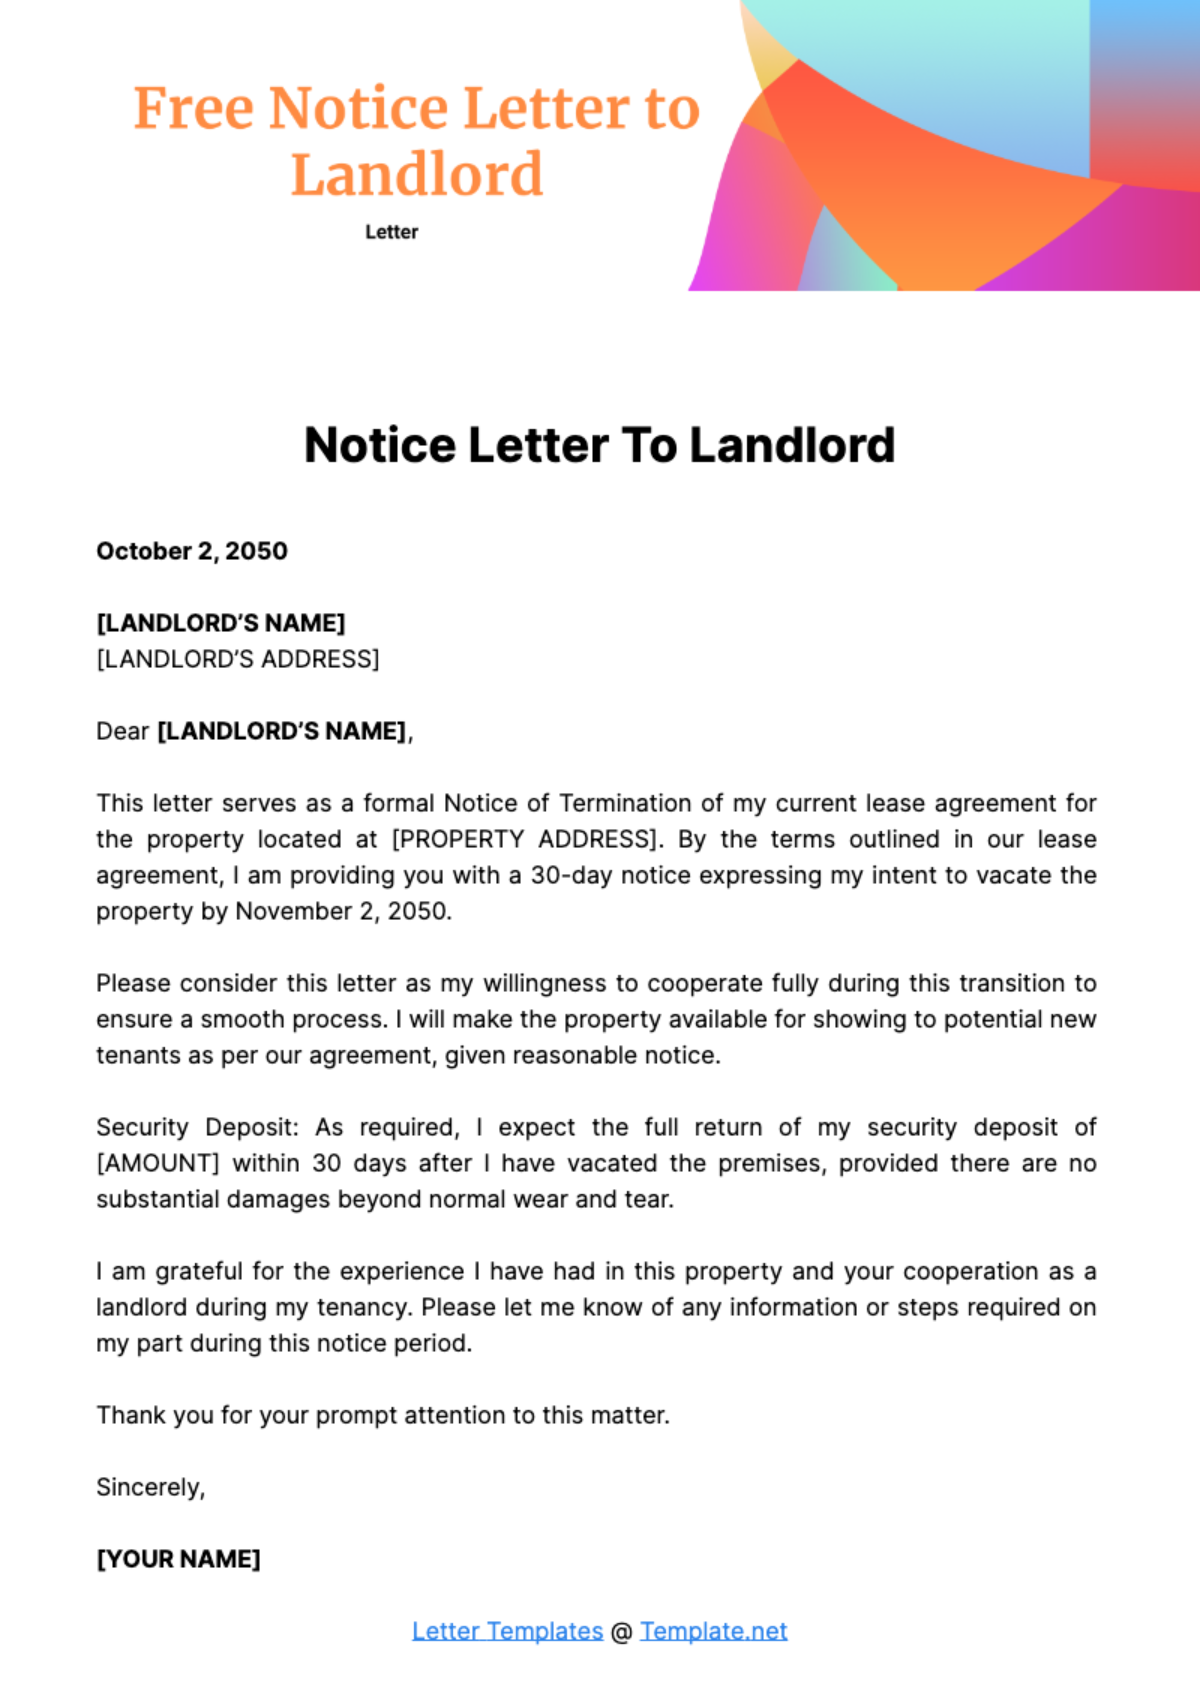 Free Notice Letter to Landlord Template